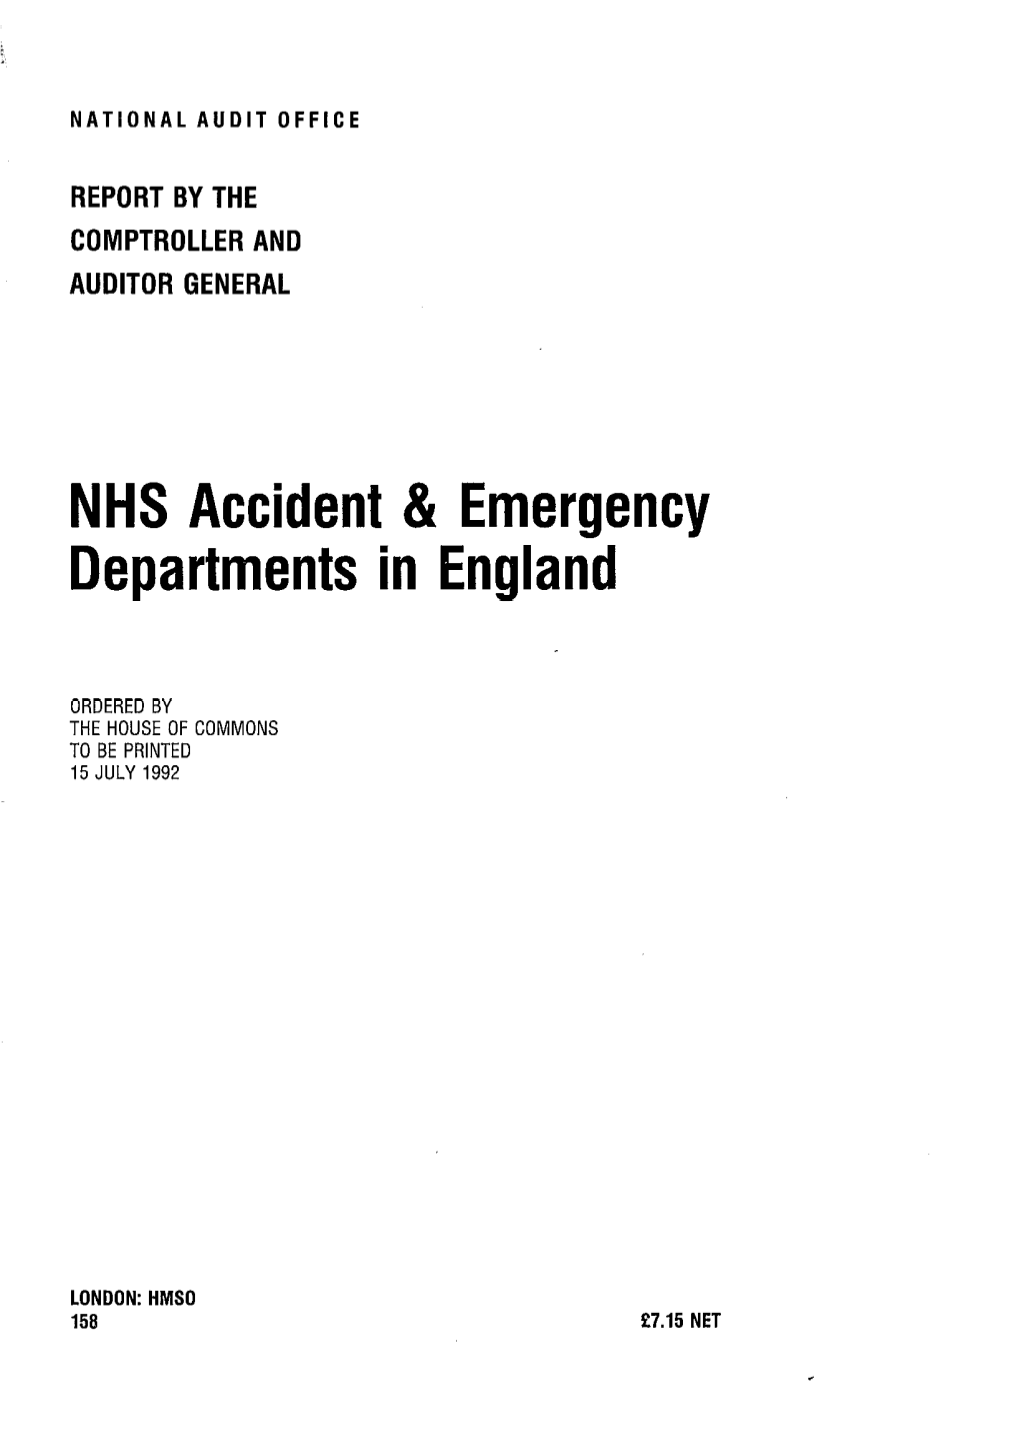 NHS Accident and Emergency Departments in England